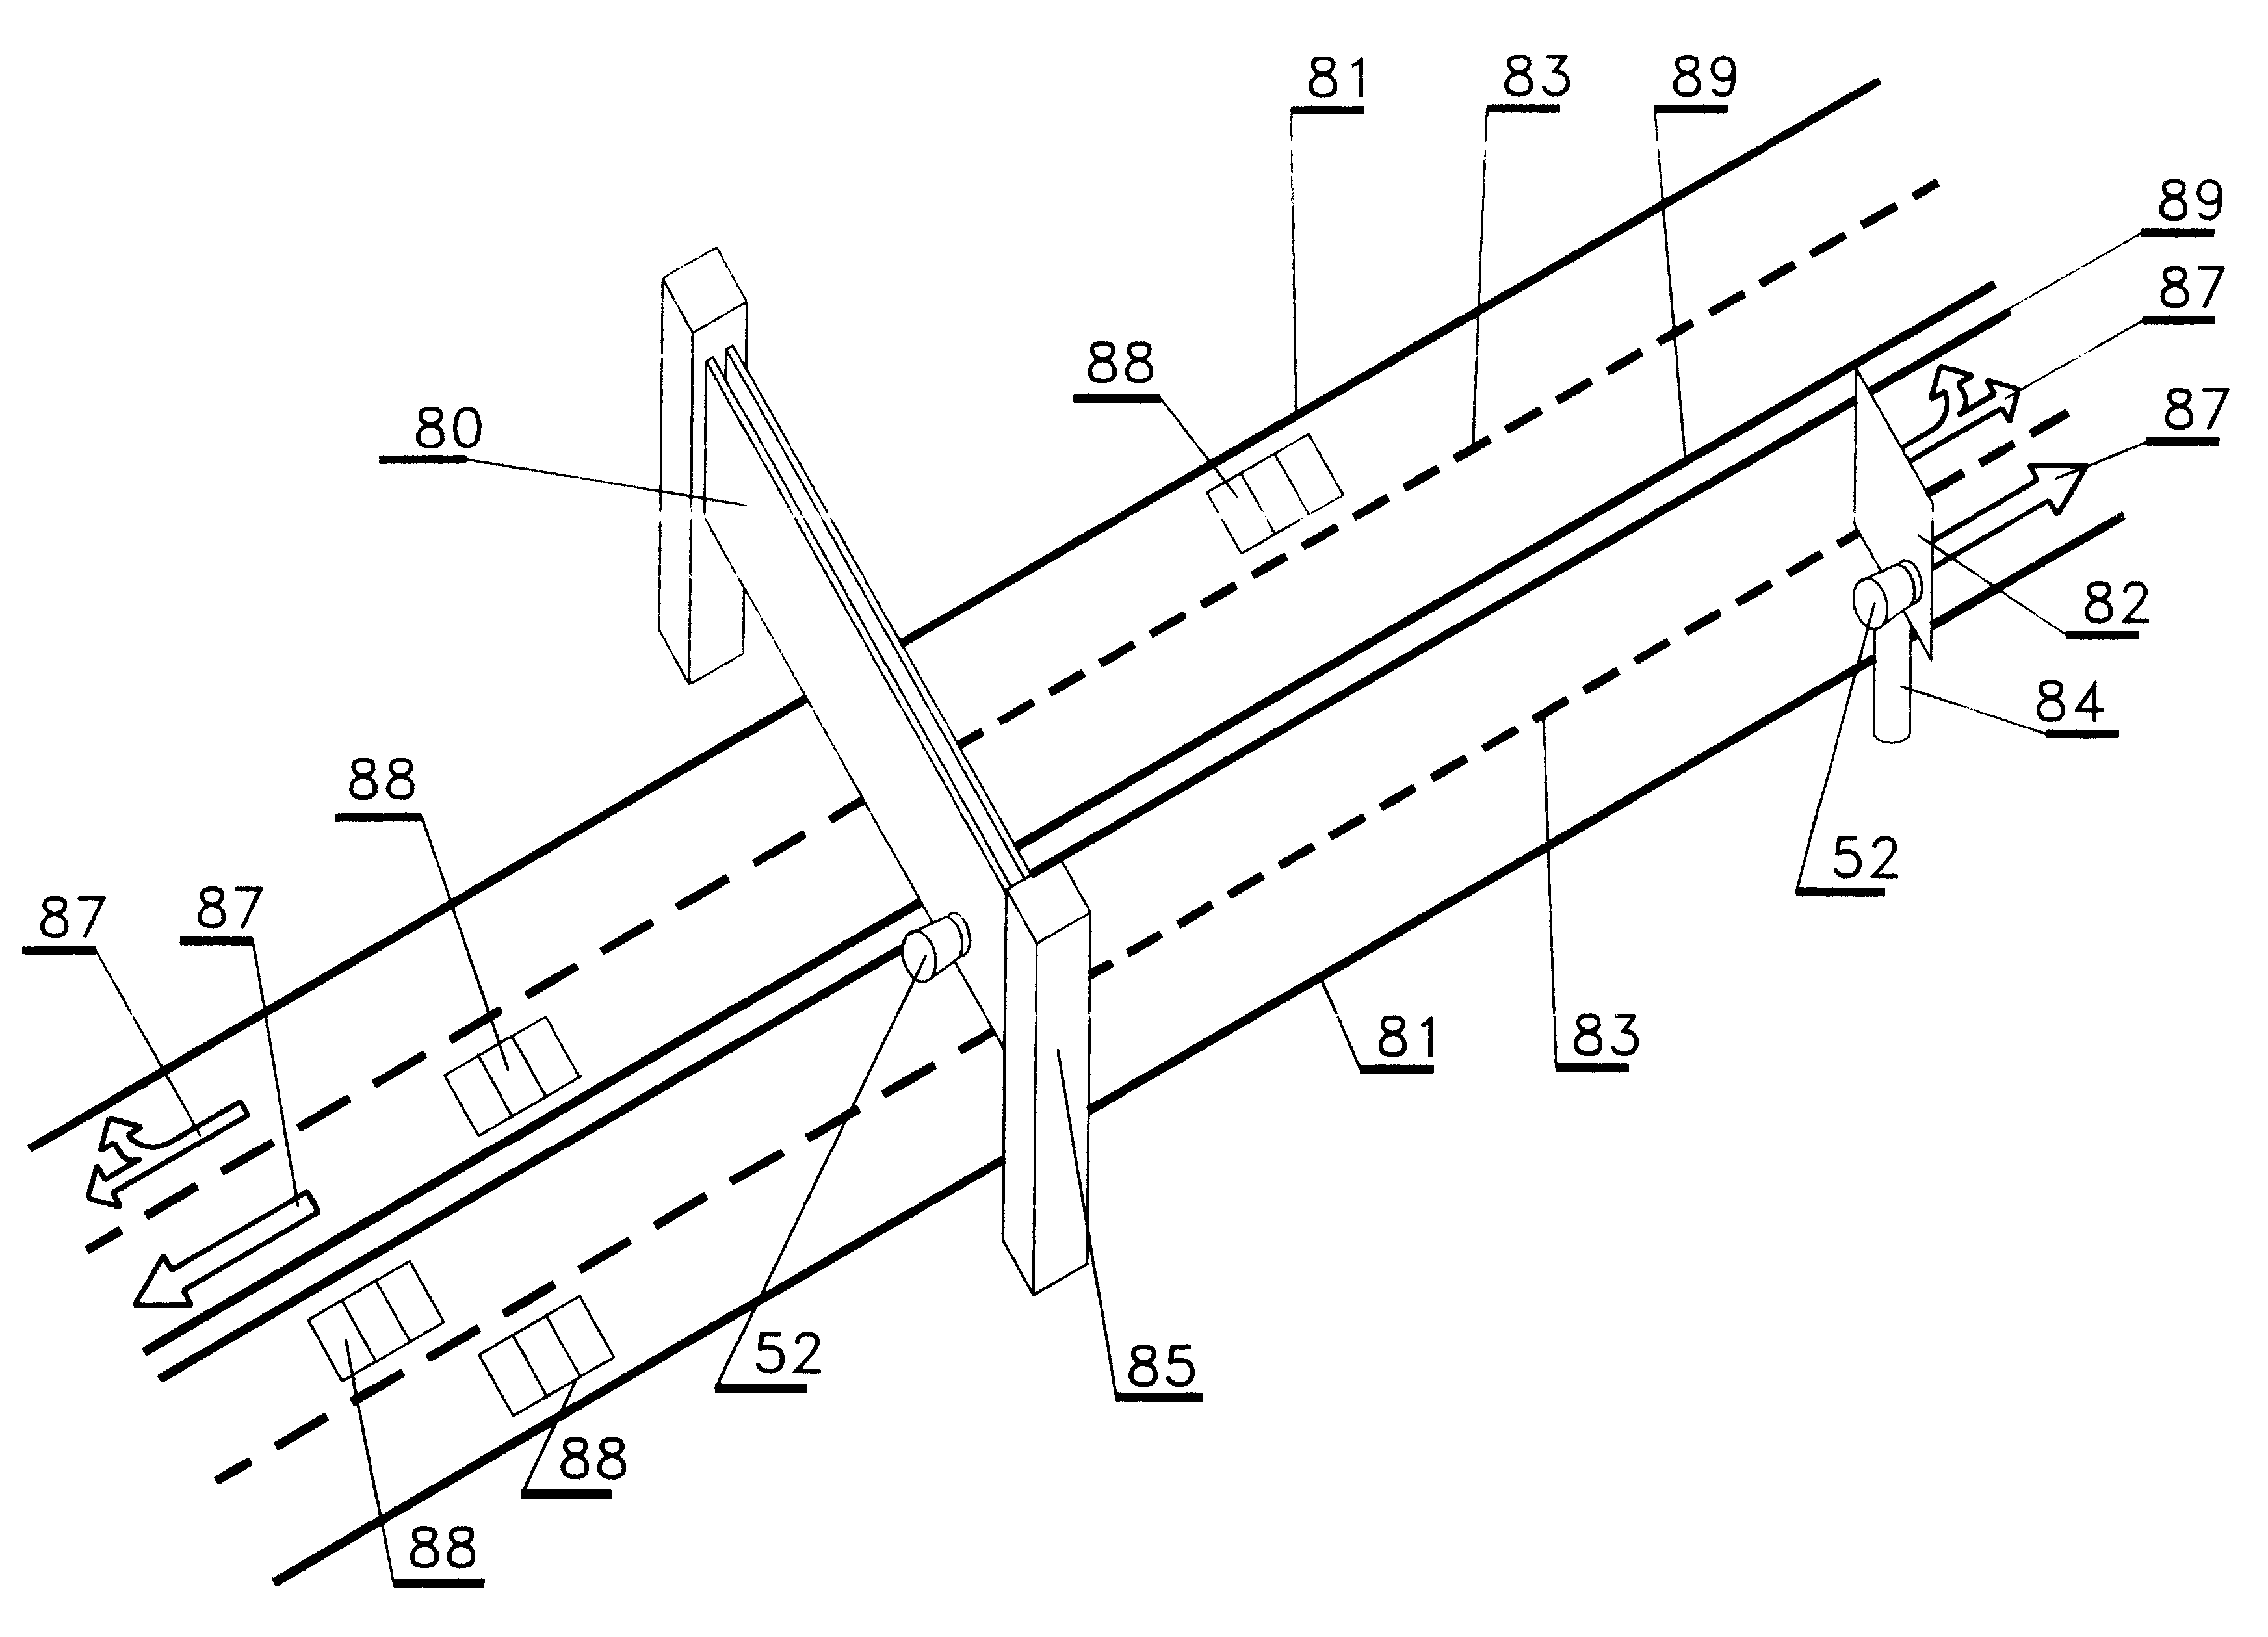 System for automatically locating and directing a vehicle